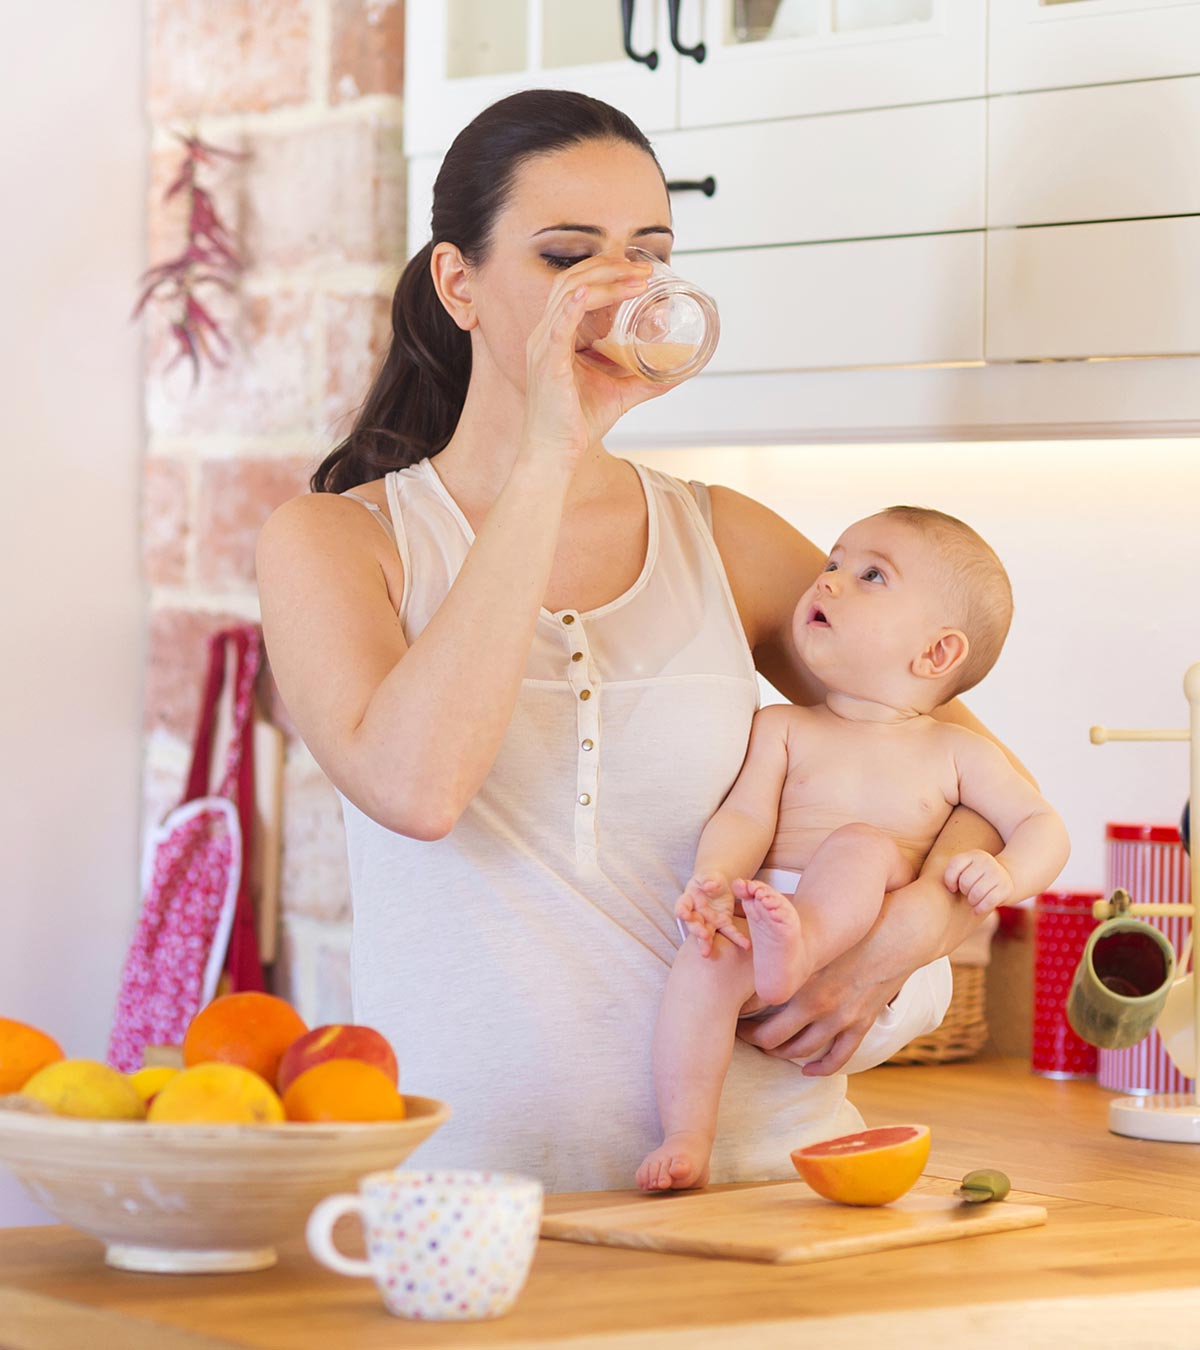 Post Pregnancy Diet: 20 Must-have Foods For New Moms